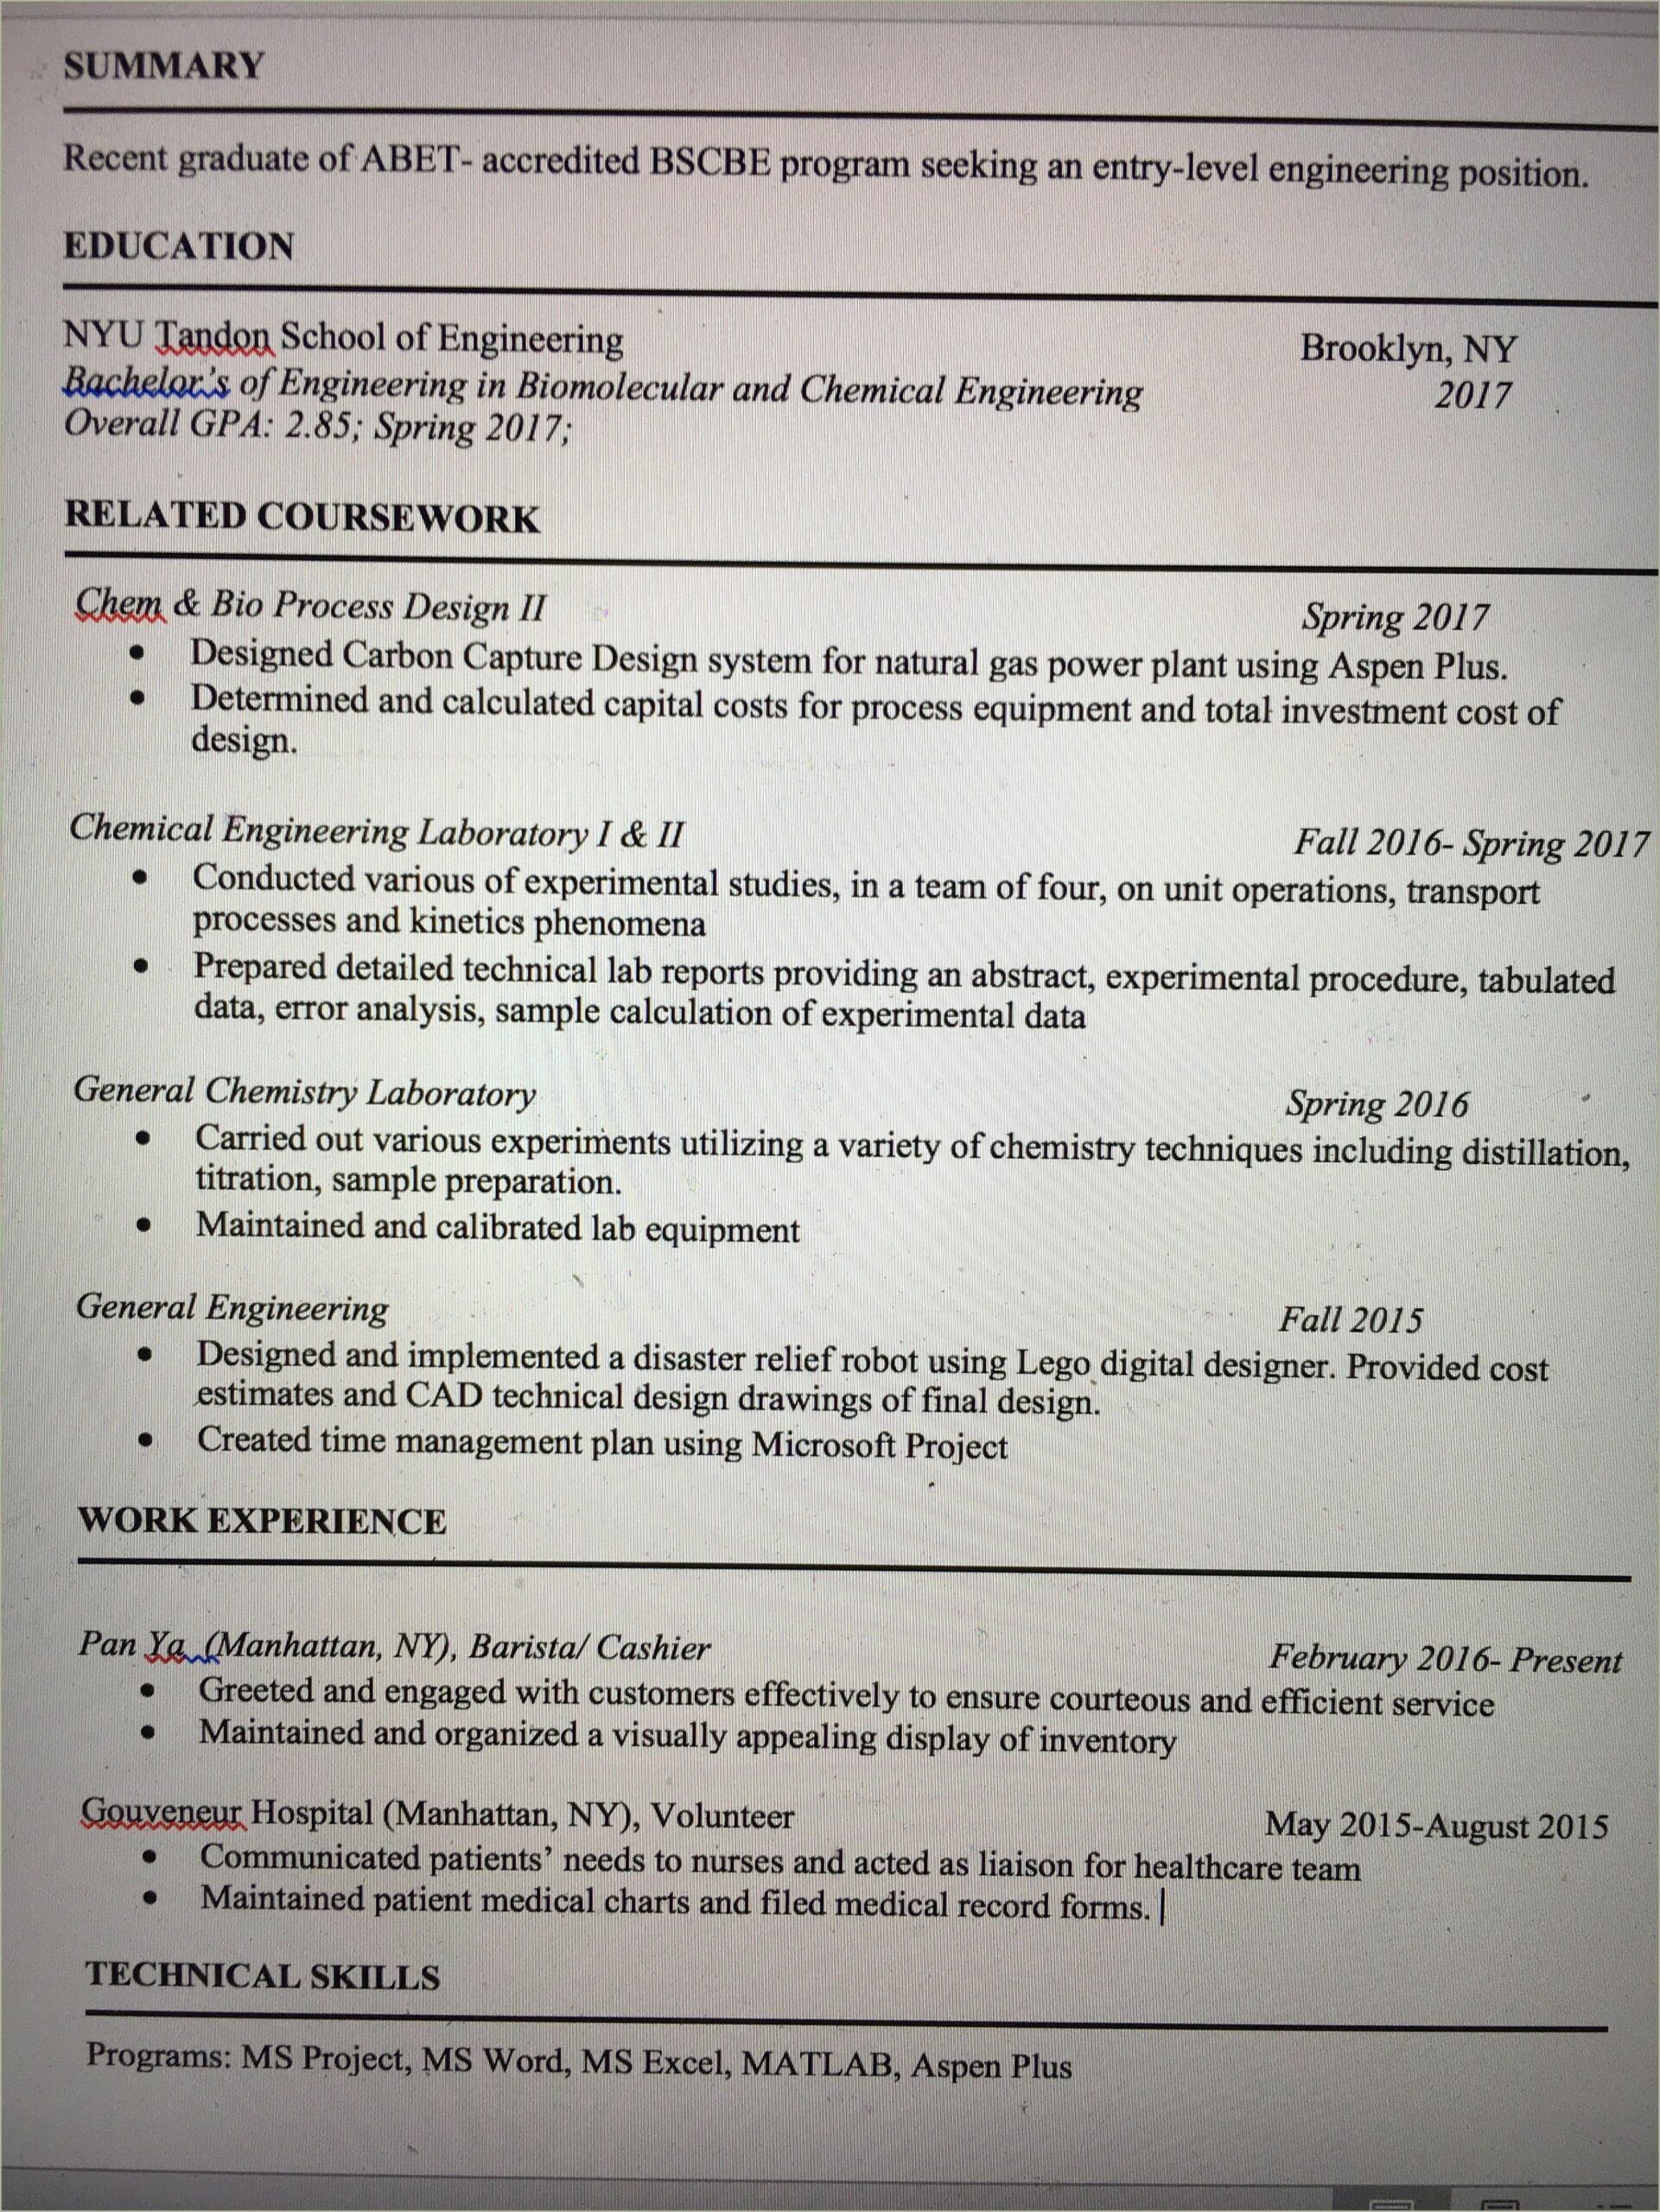 Best Entry Level Chemical Engineering Resume